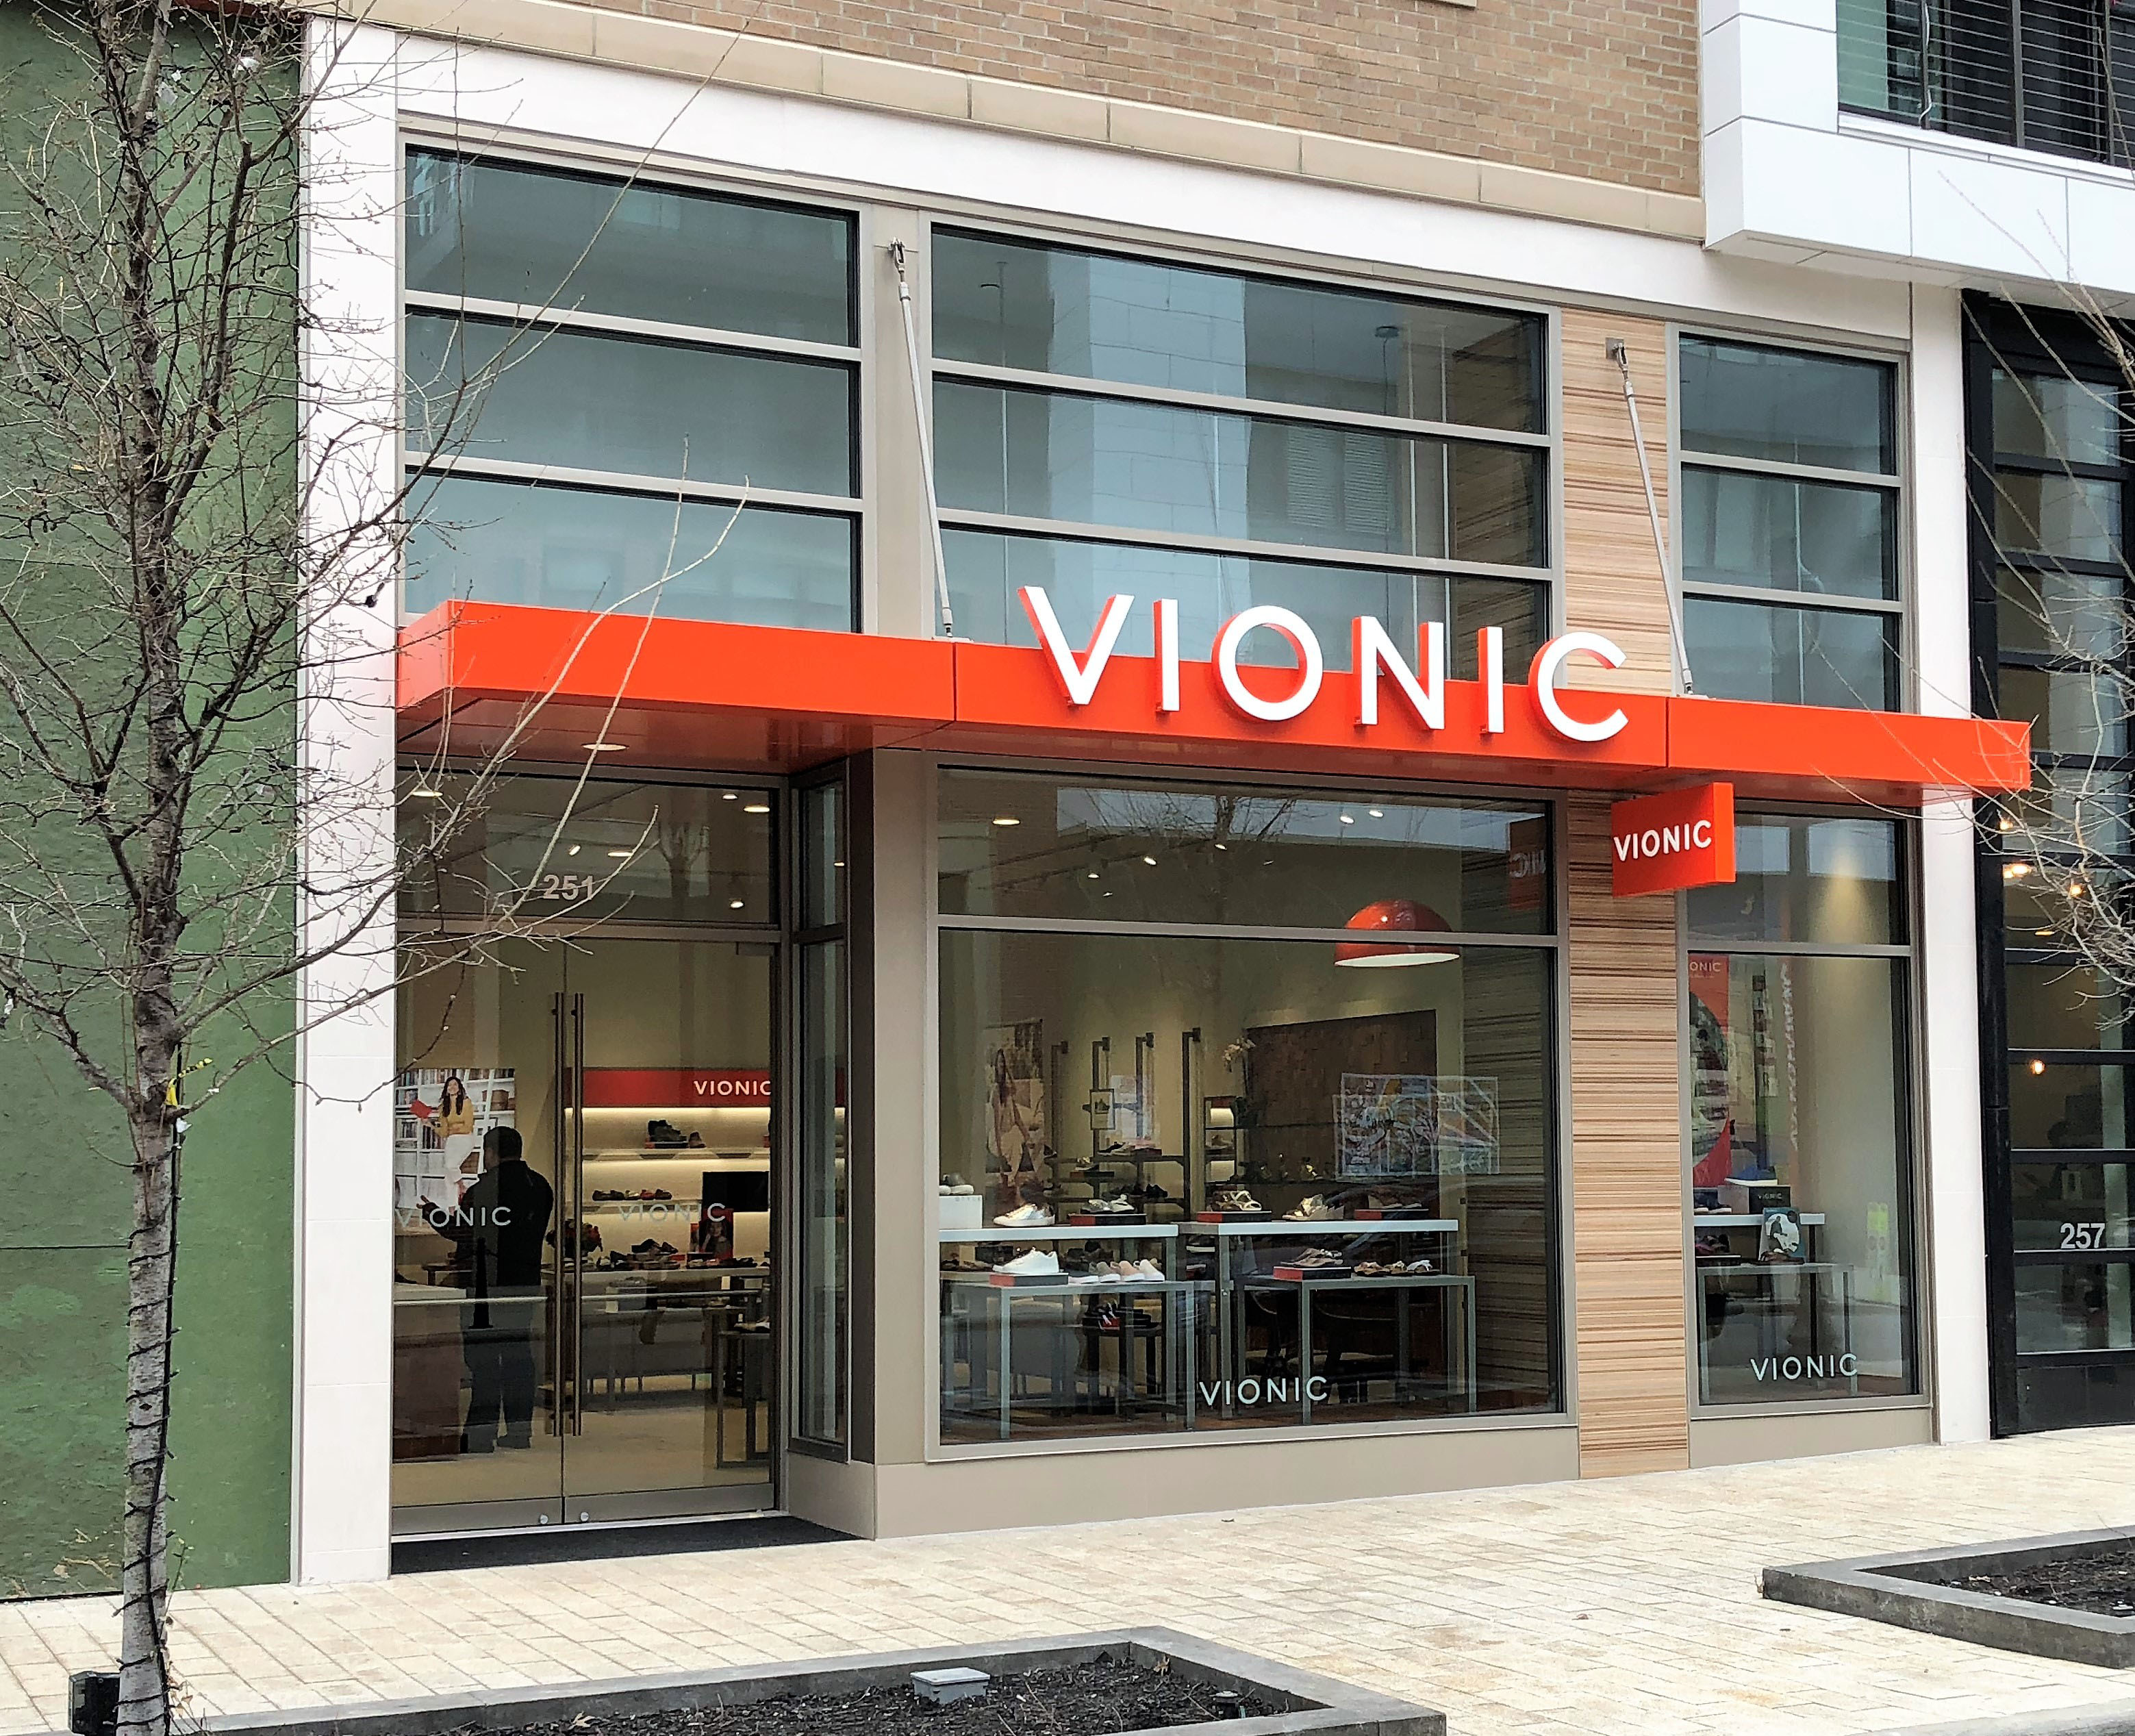 Second Vionic Shoe Store in Nation 